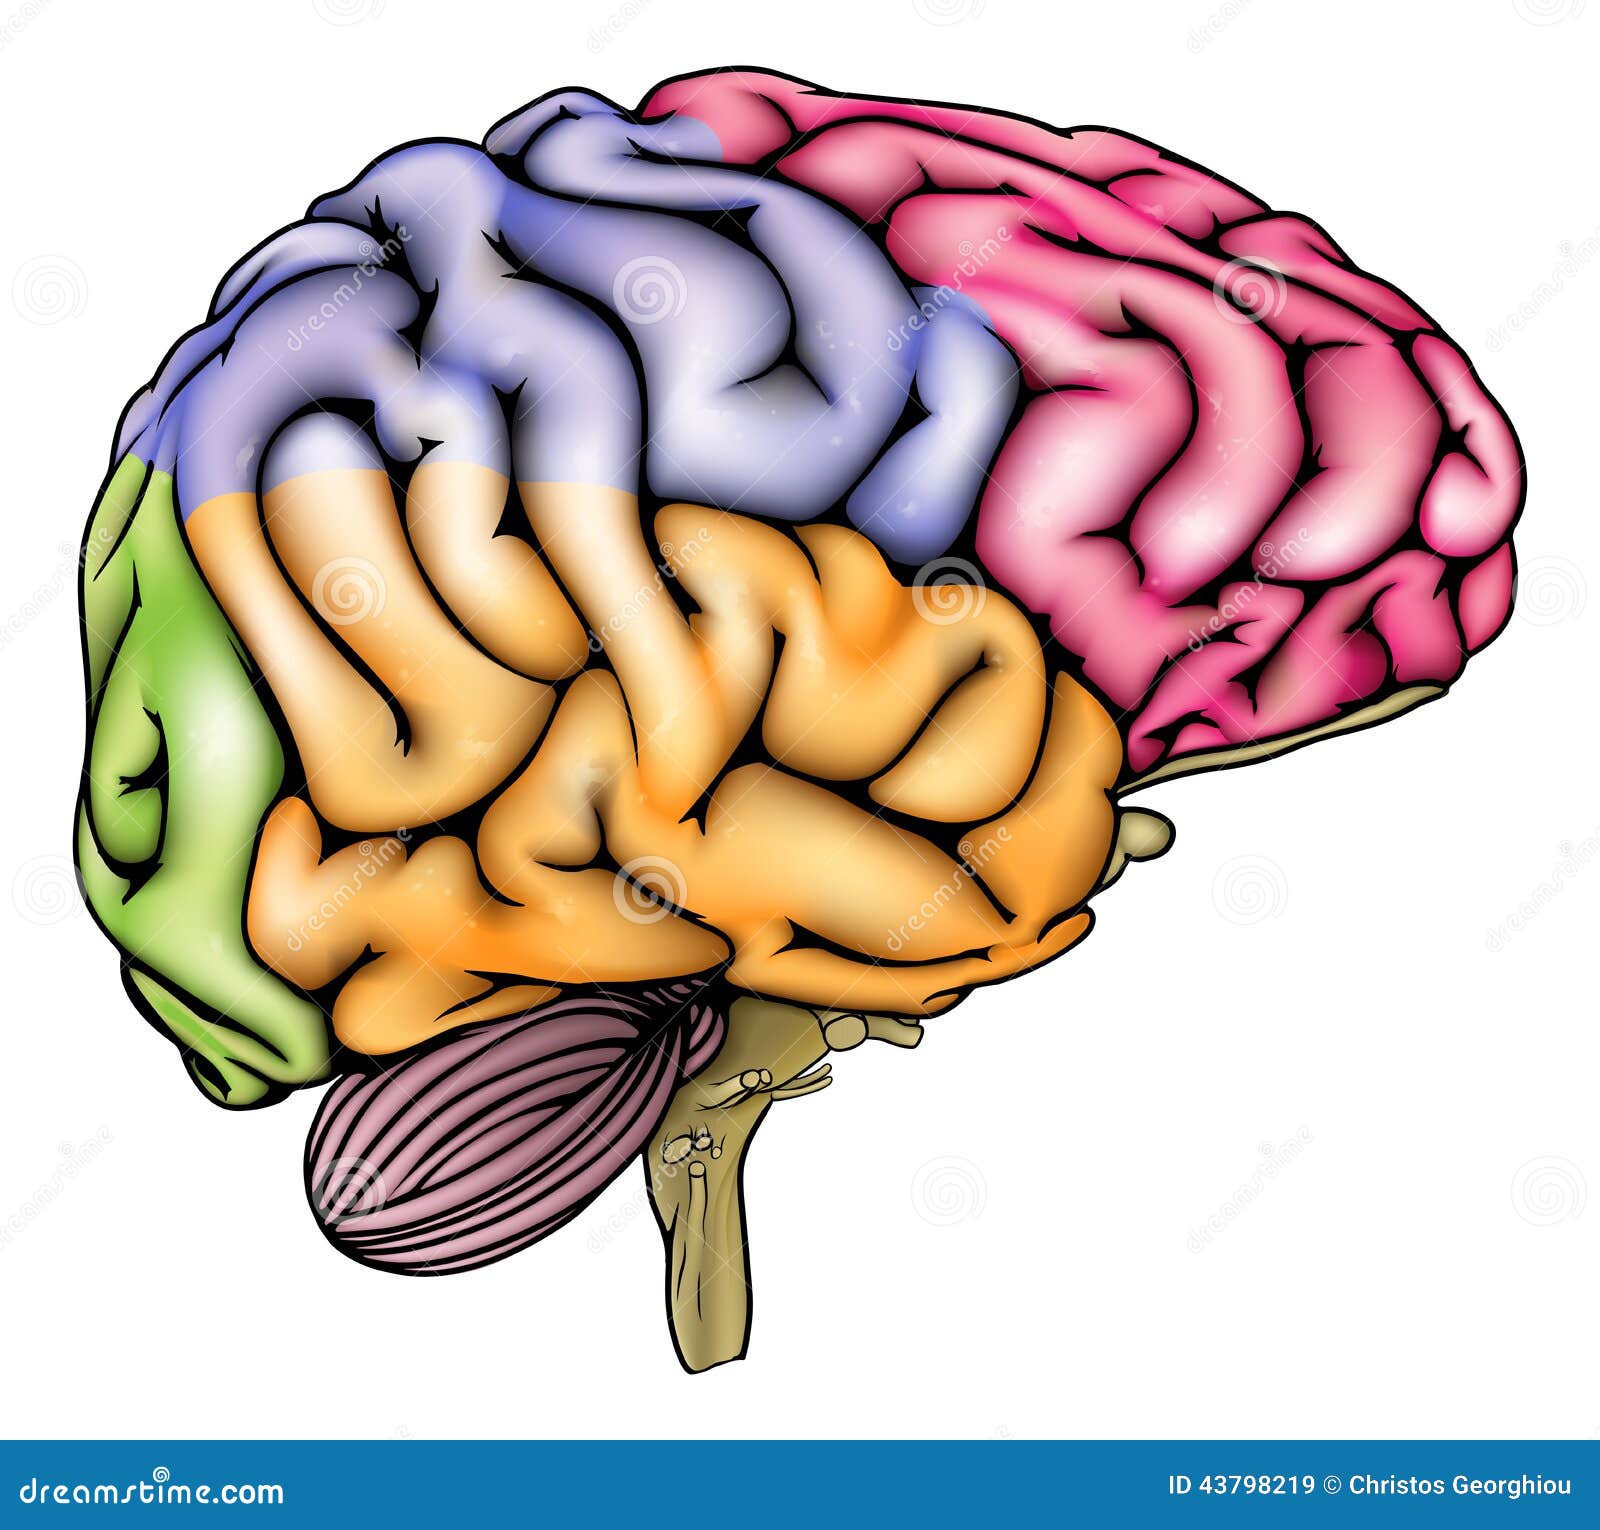 Human Brain Anatomy Sectioned Stock Vector Image 43798219